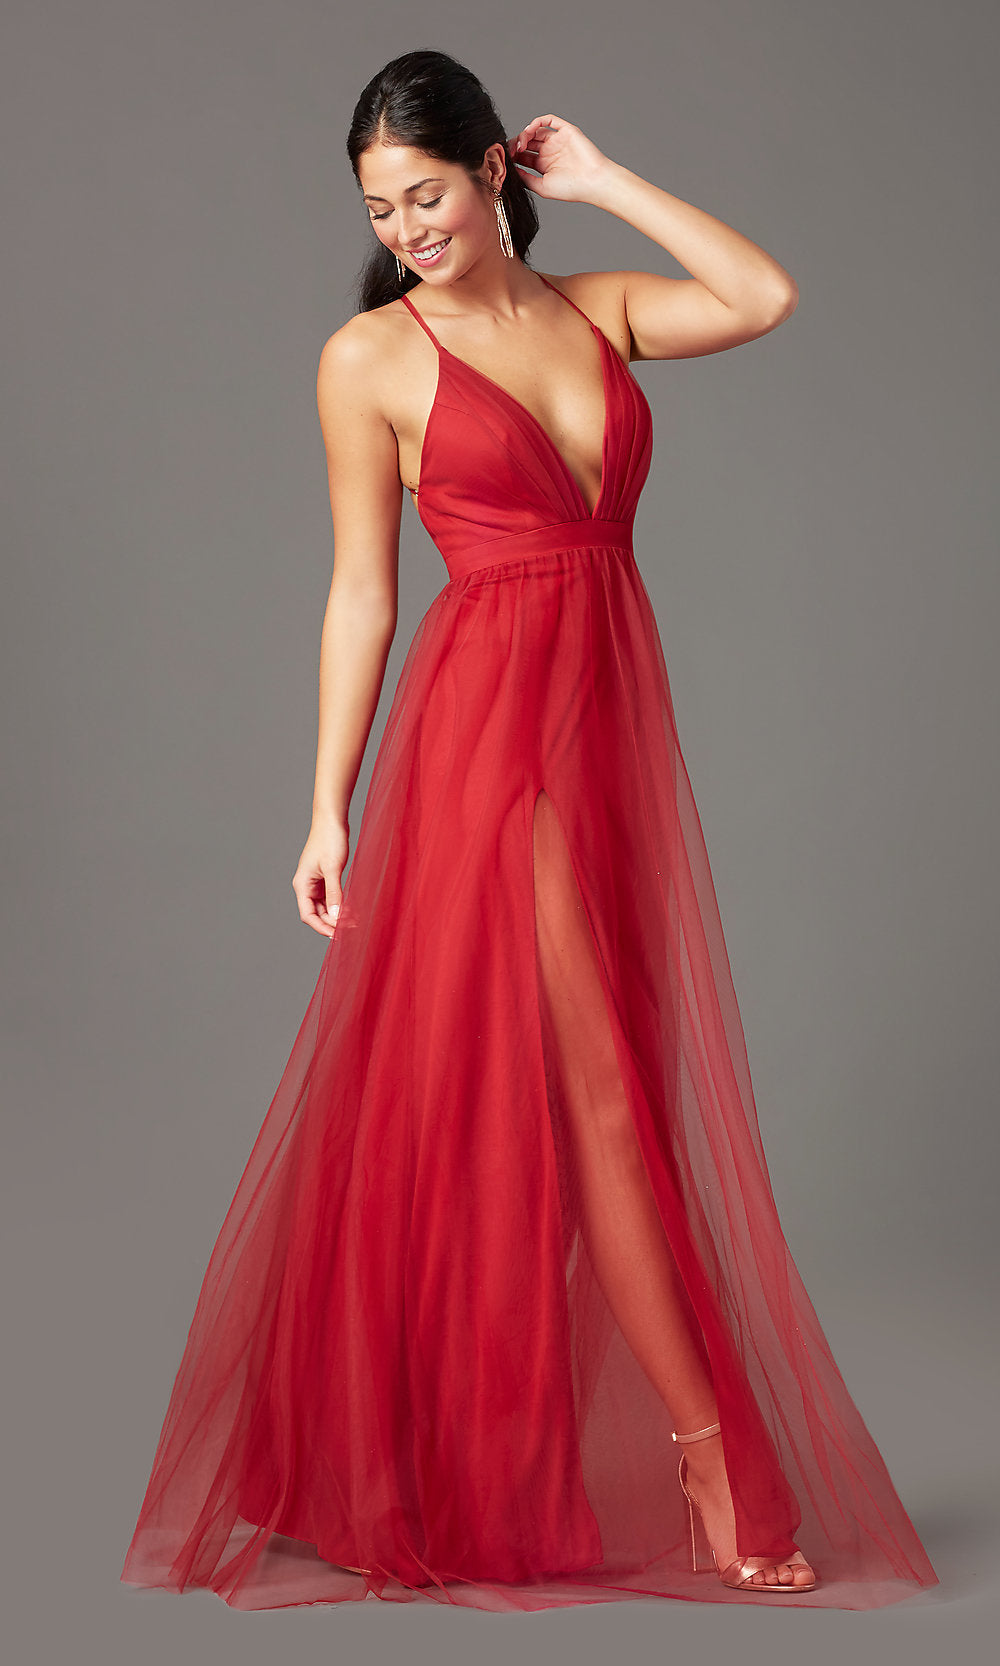 Red Long Satin Prom Dress with Open Back - PromGirl